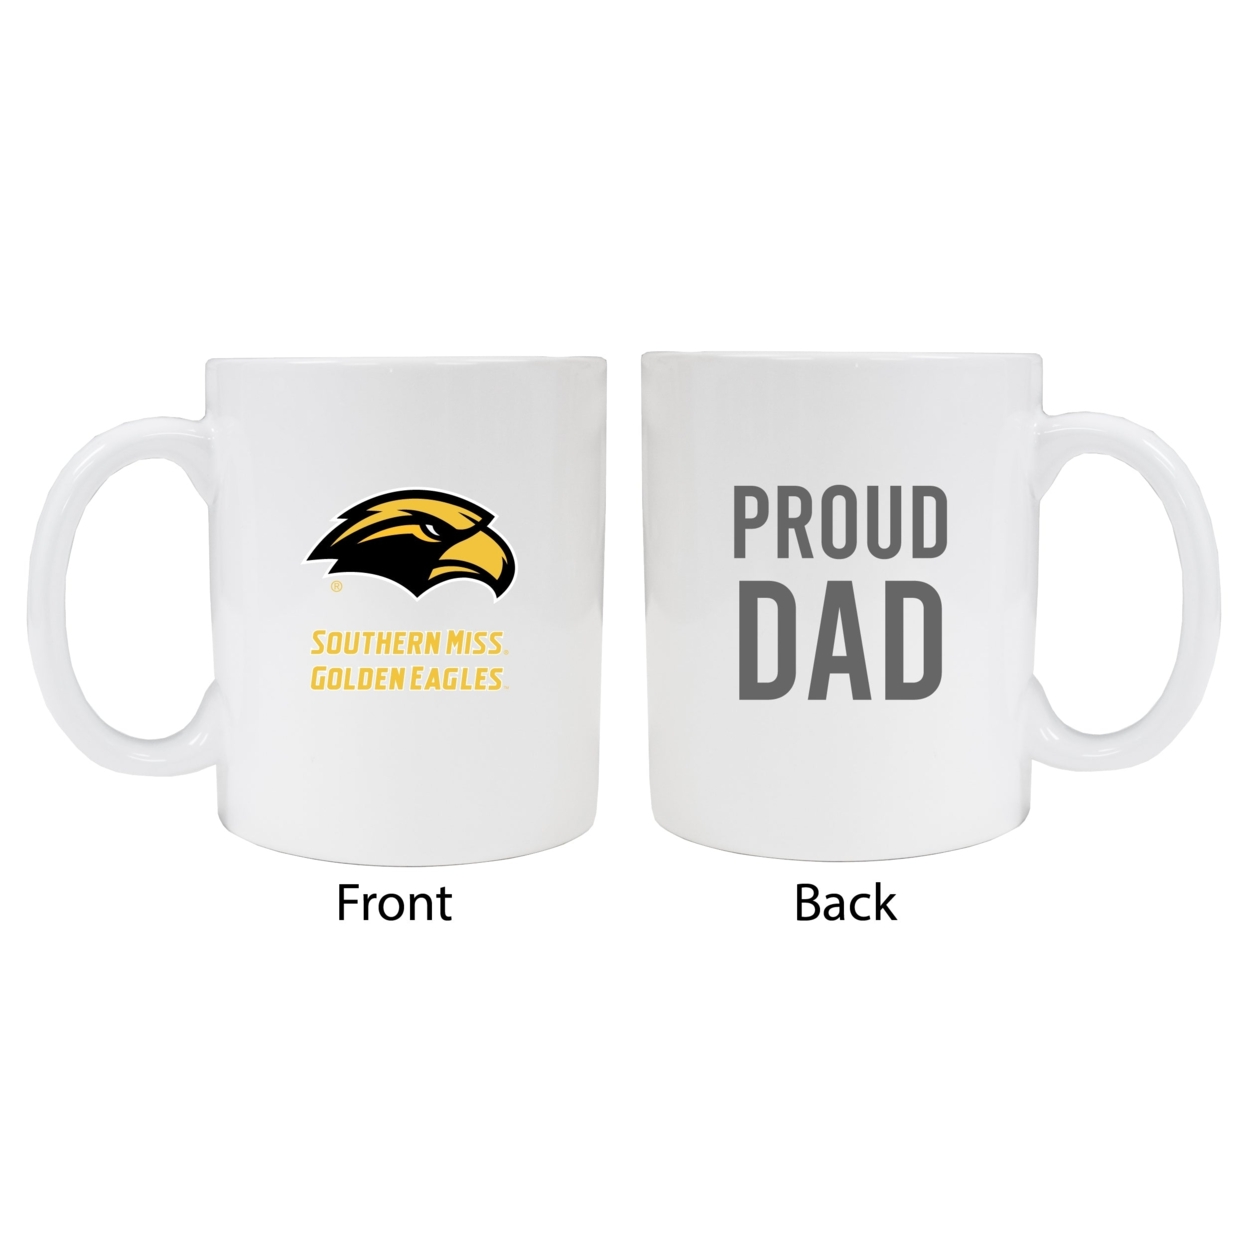 Southern Mississippi Golden Eagles Proud Dad Ceramic Coffee Mug - White (2 Pack)